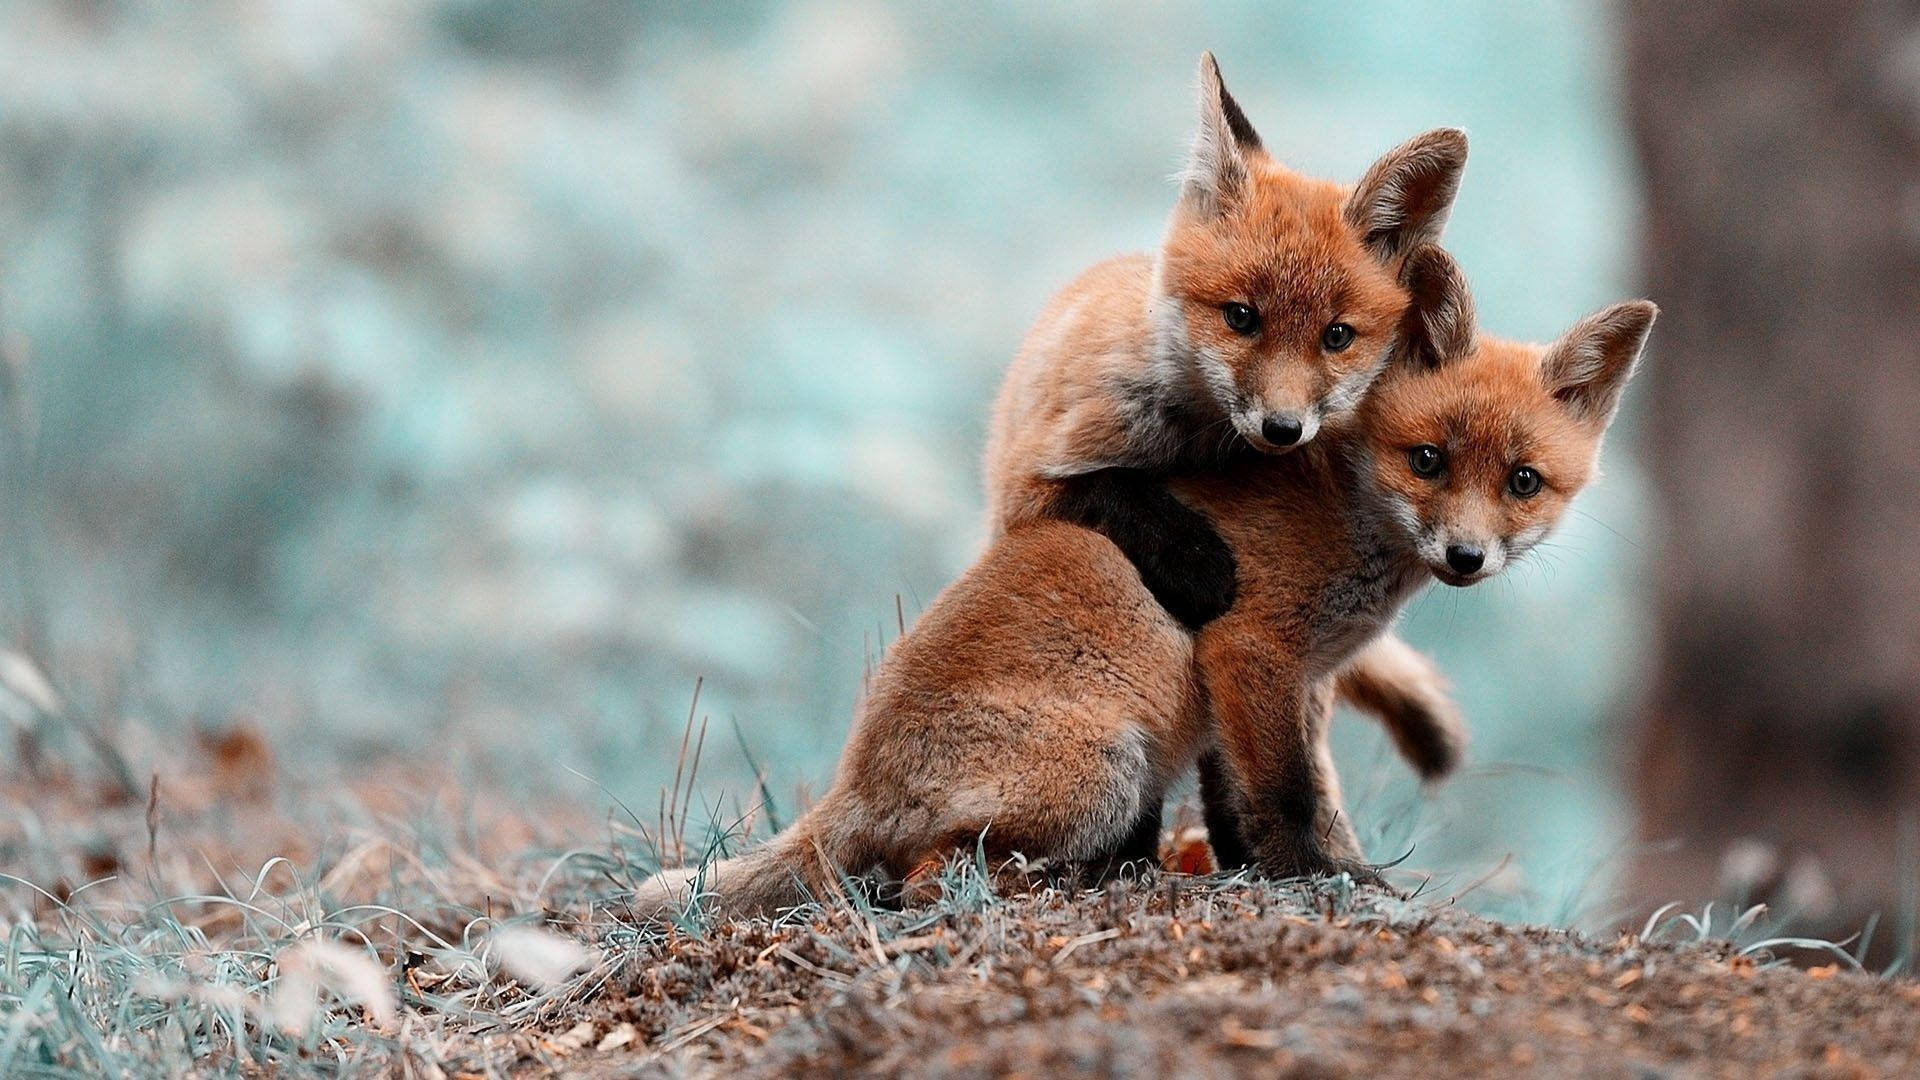 Baby Animals Foxes In The Woods